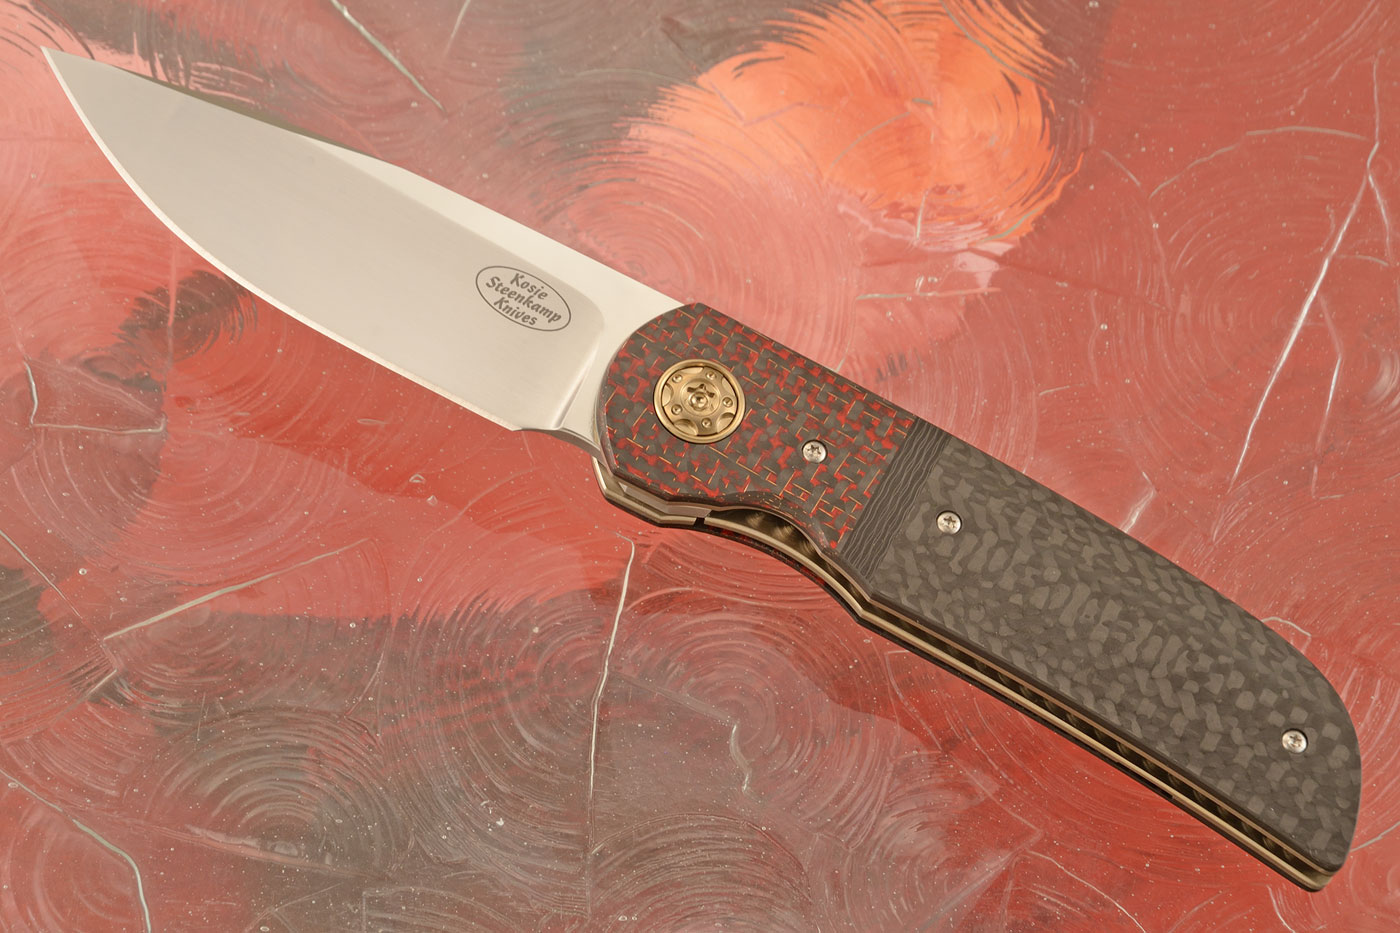 Majesty Front Flipper with Carbon Fiber (IKBS) - M390